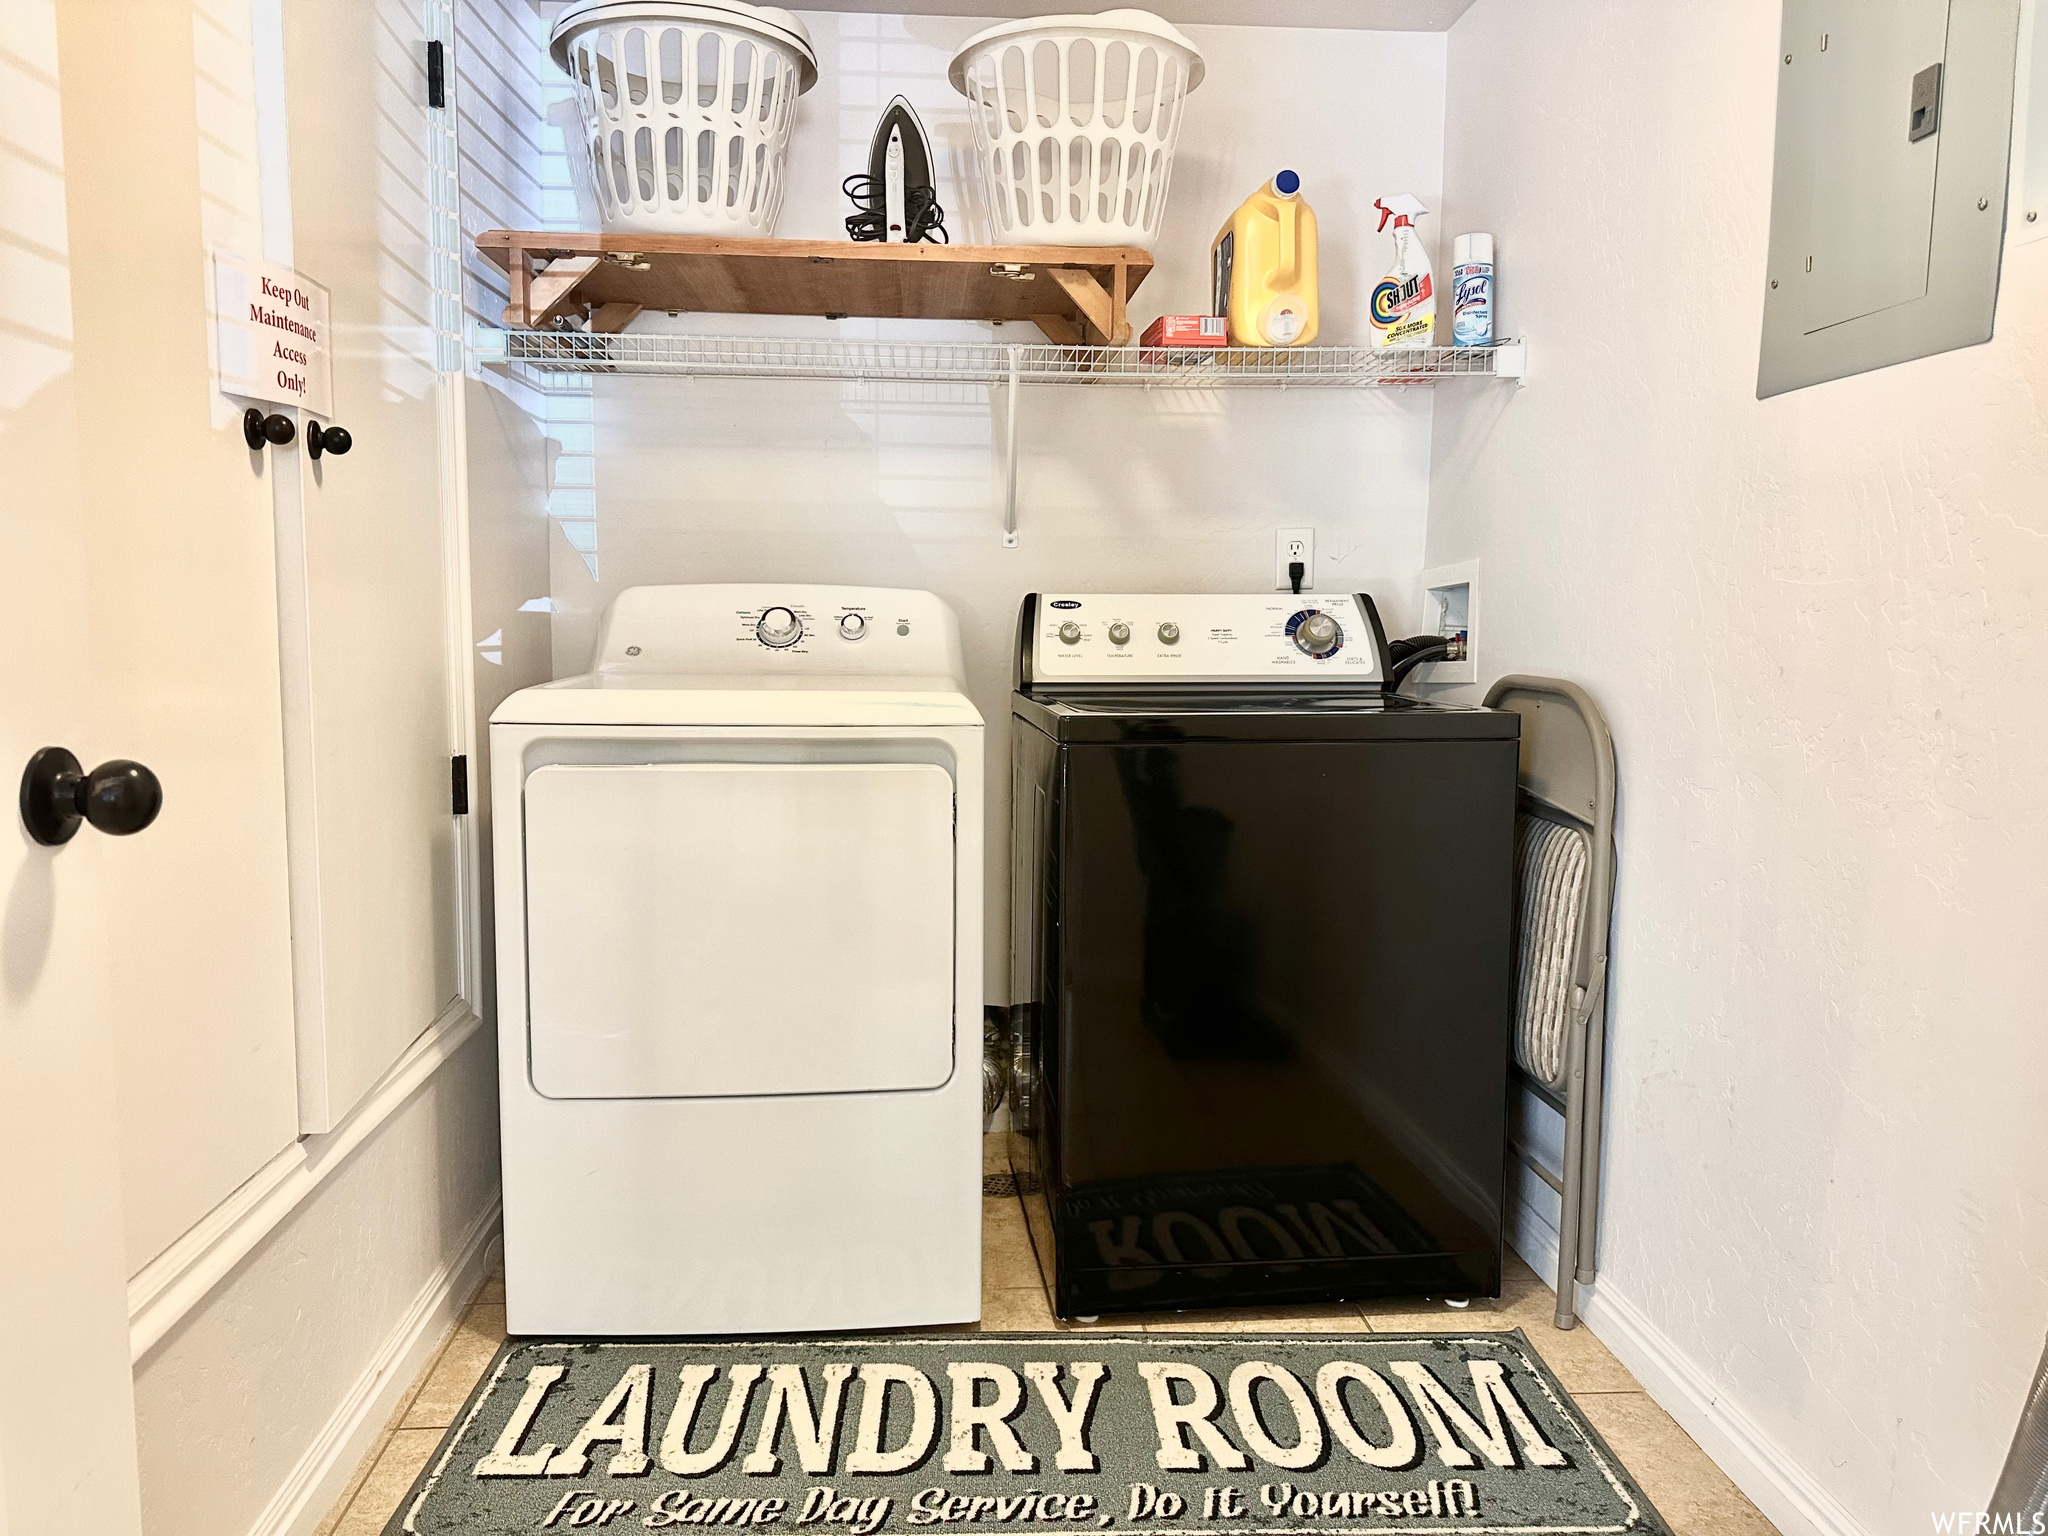 Clothes washing area featuring washer and clothes dryer, light tile flooring, and hookup for a washing machine